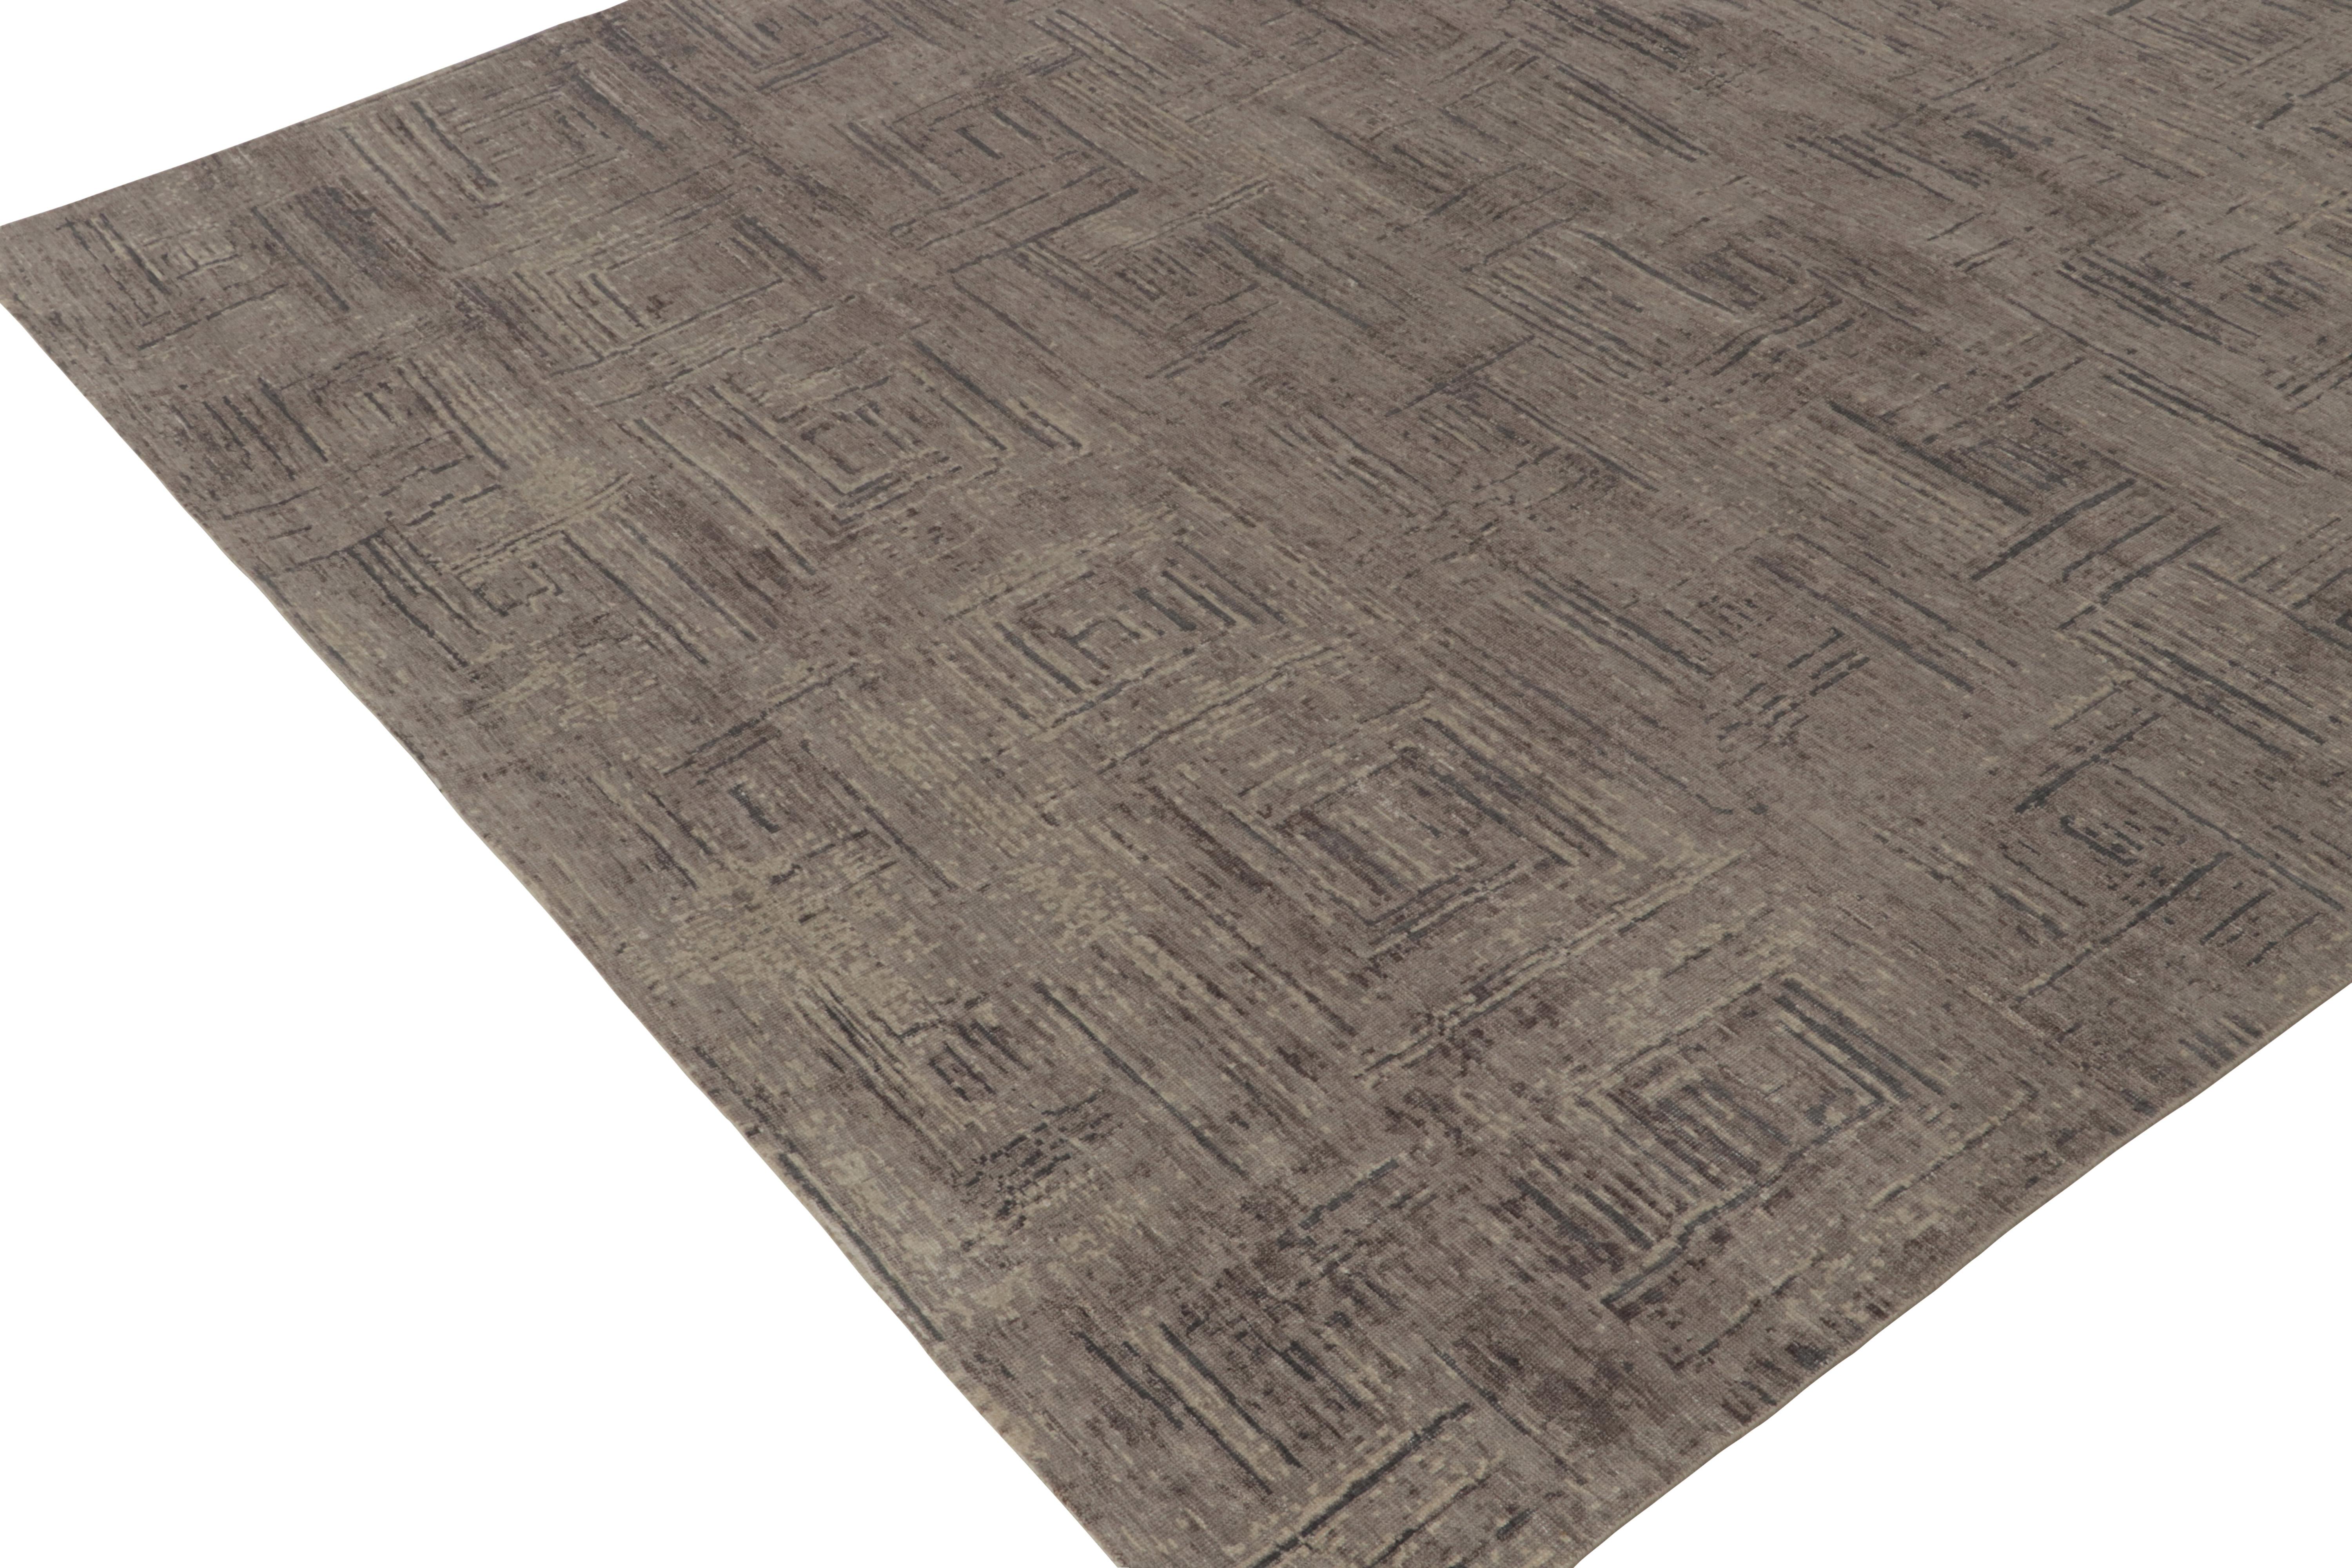 Indian Rug & Kilim's Hand-Knotted Abstract Rug in Grey, Beige-Brown Geometric Pattern For Sale